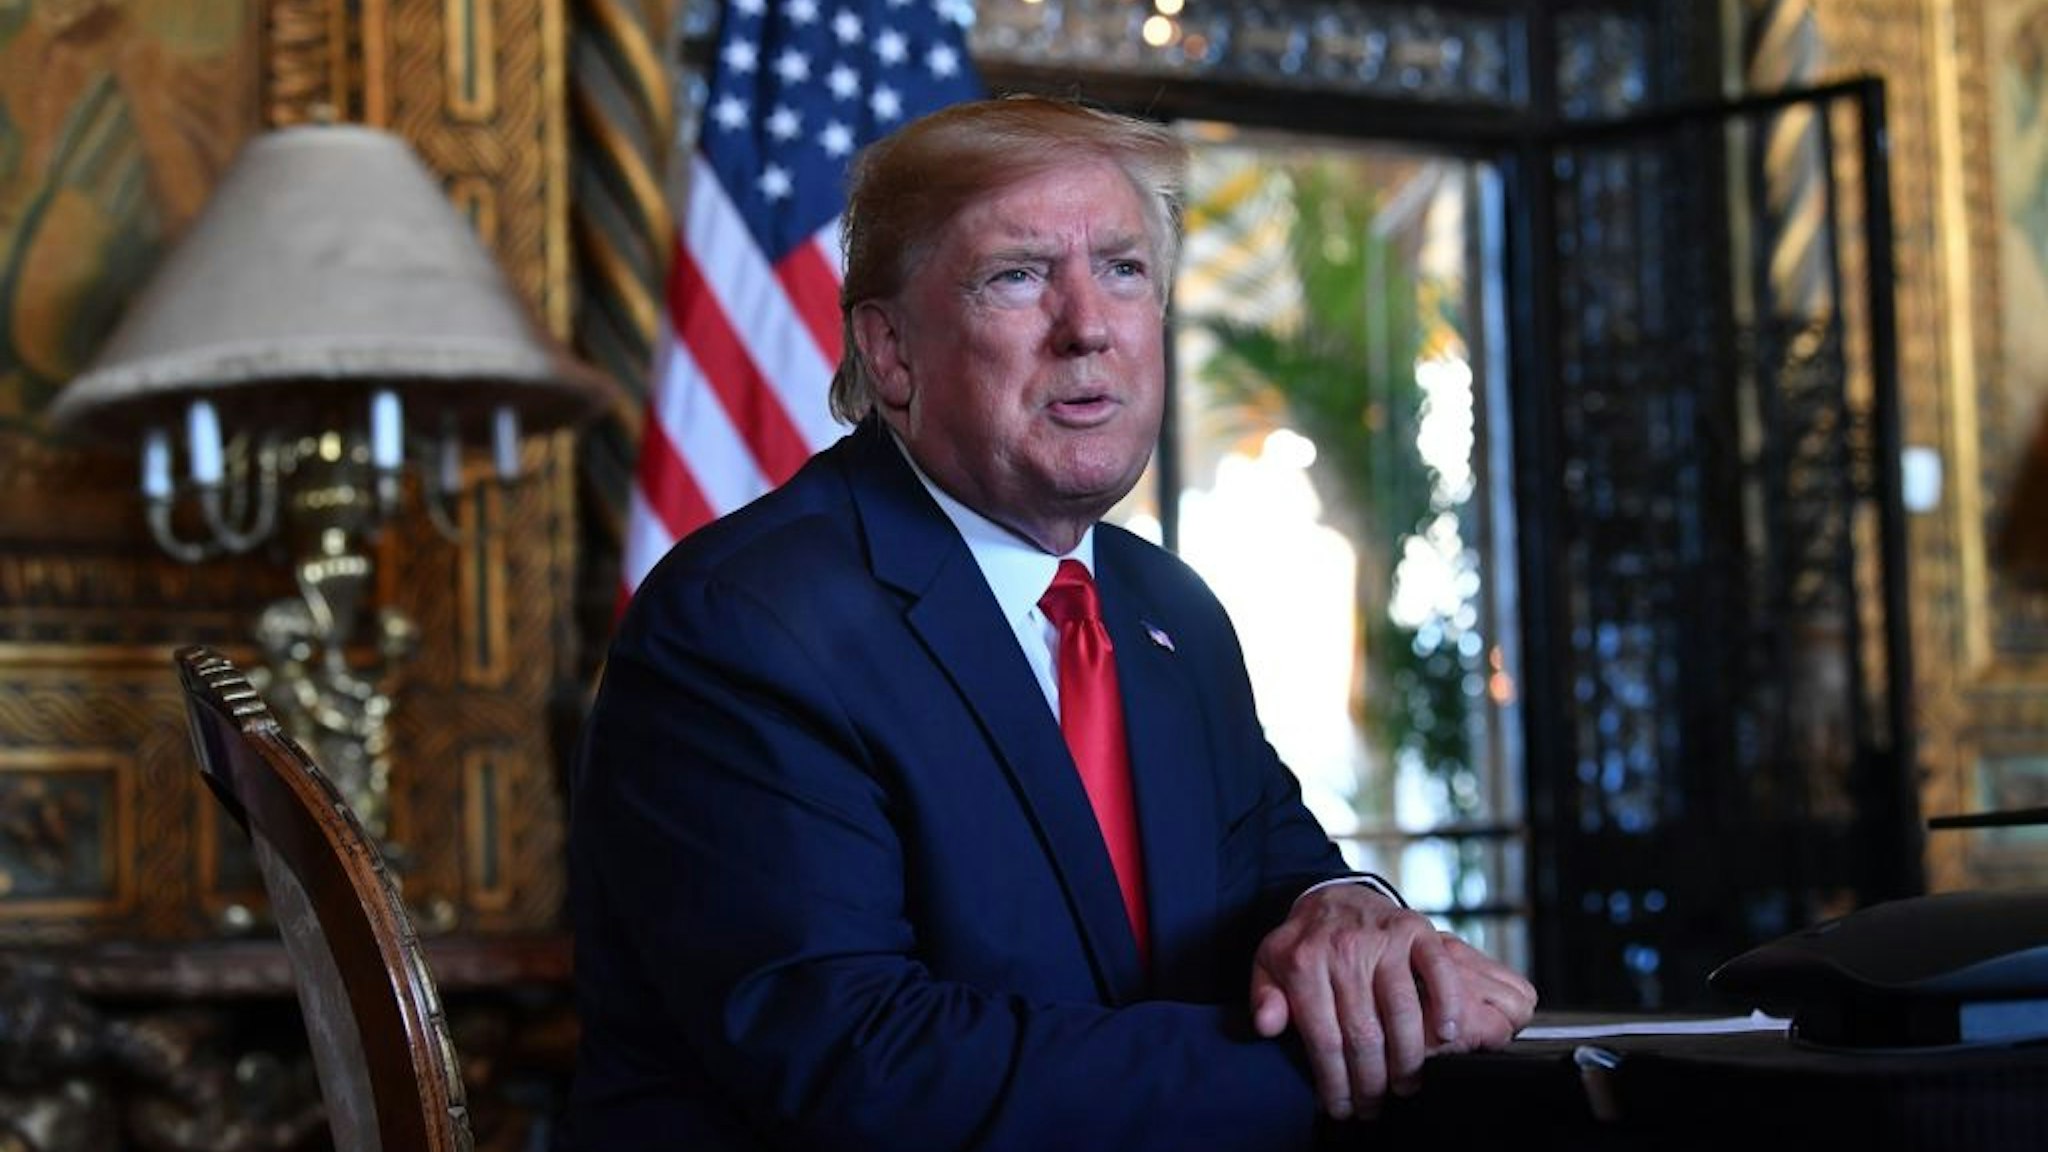 US President Donald Trump answers questions from reporters after making a video call to the troops stationed worldwide at the Mar-a-Lago estate in Palm Beach Florida, on December 24, 2019.